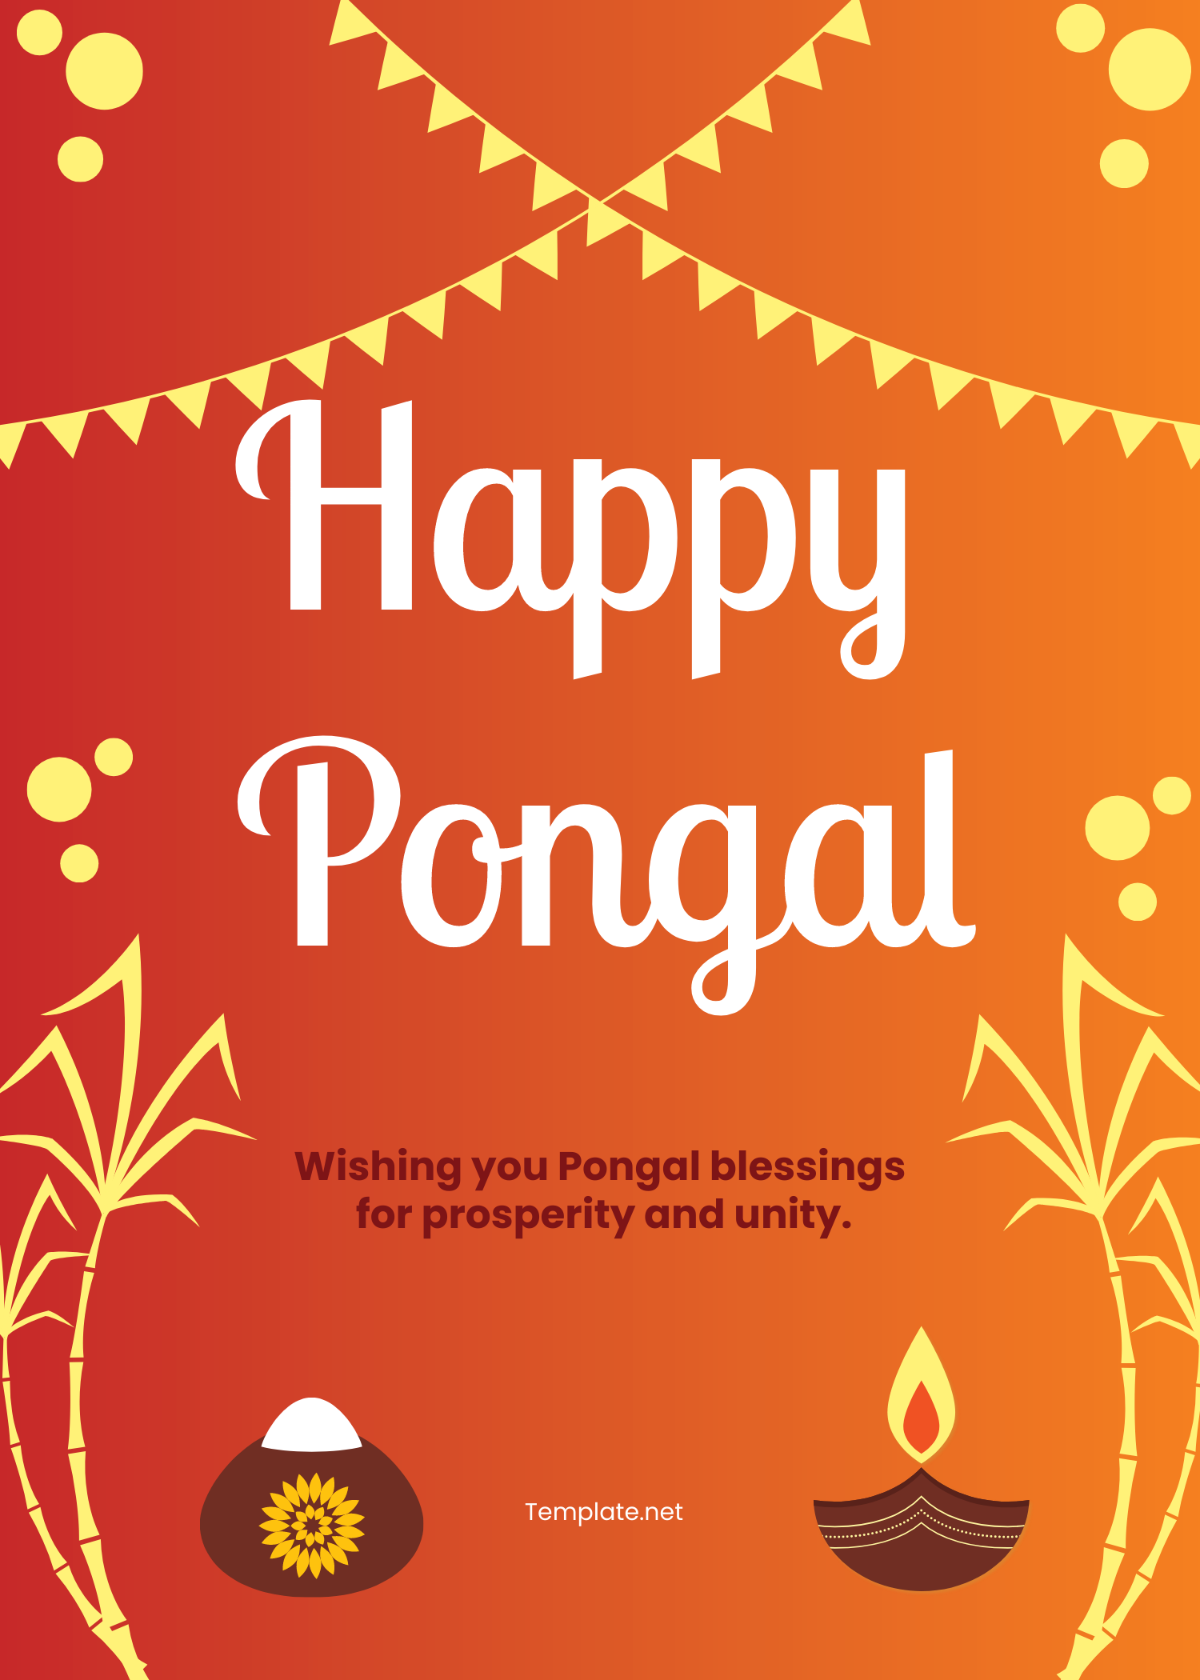 Happy Pongal Wishes Template